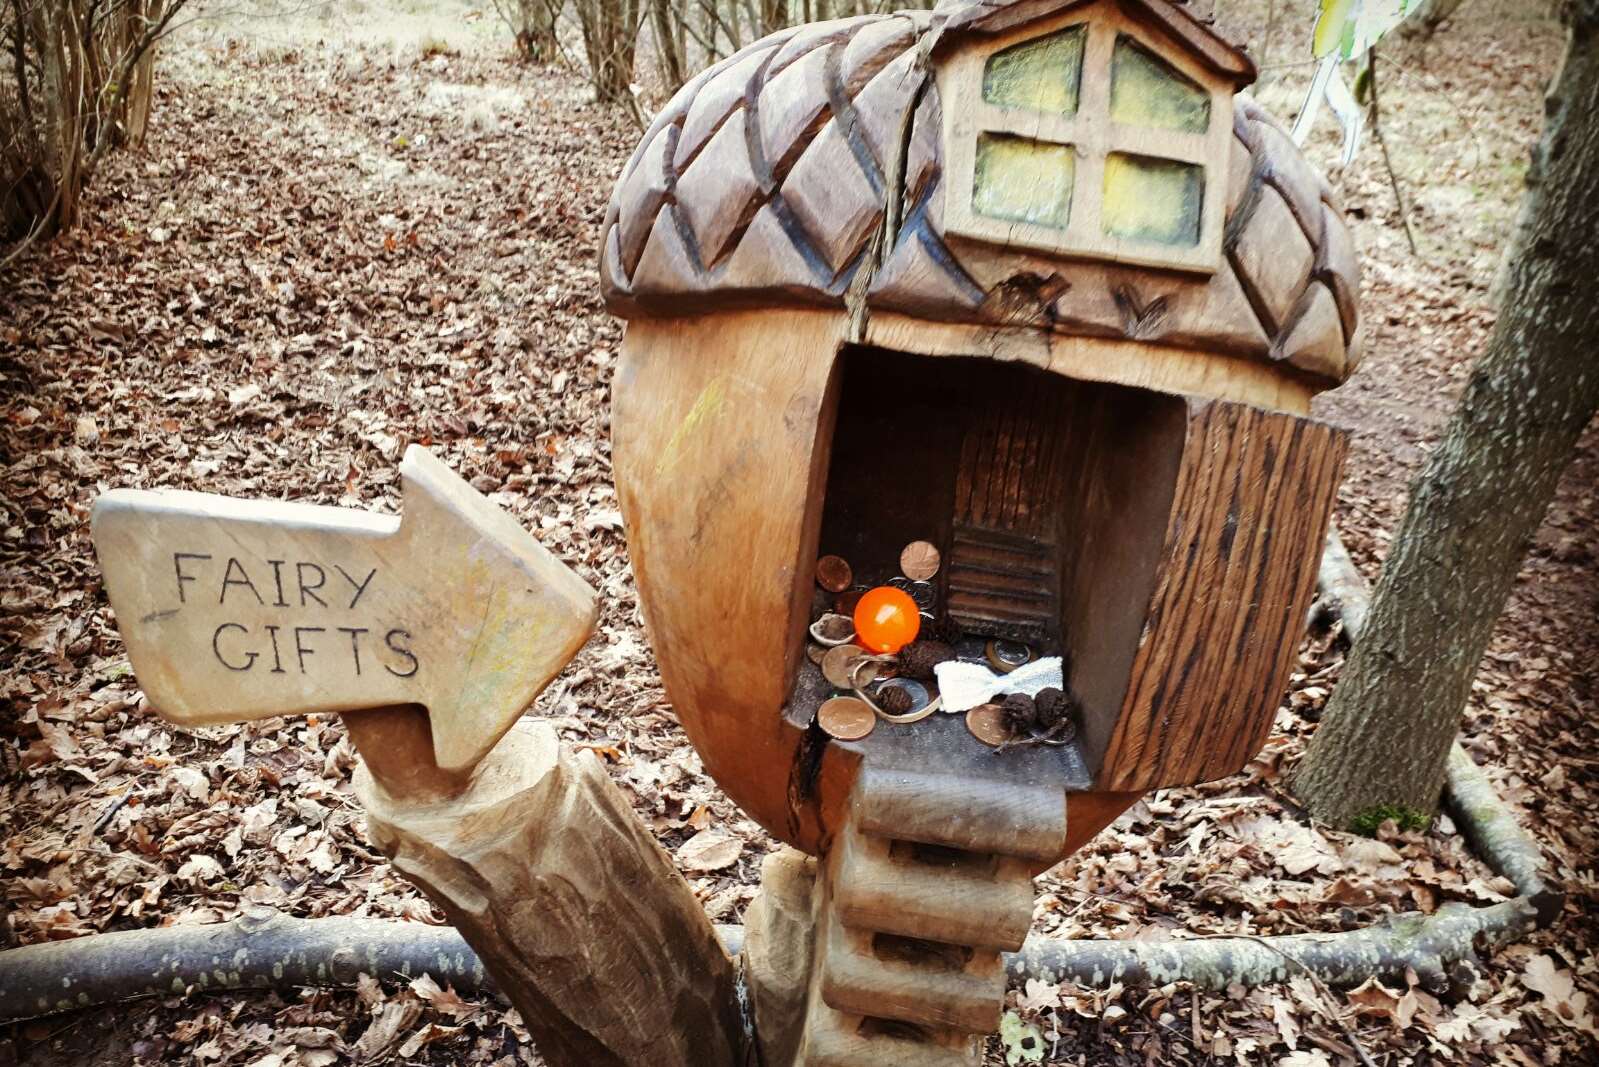 Don't miss the Fairy Village if you visit Jeskyns